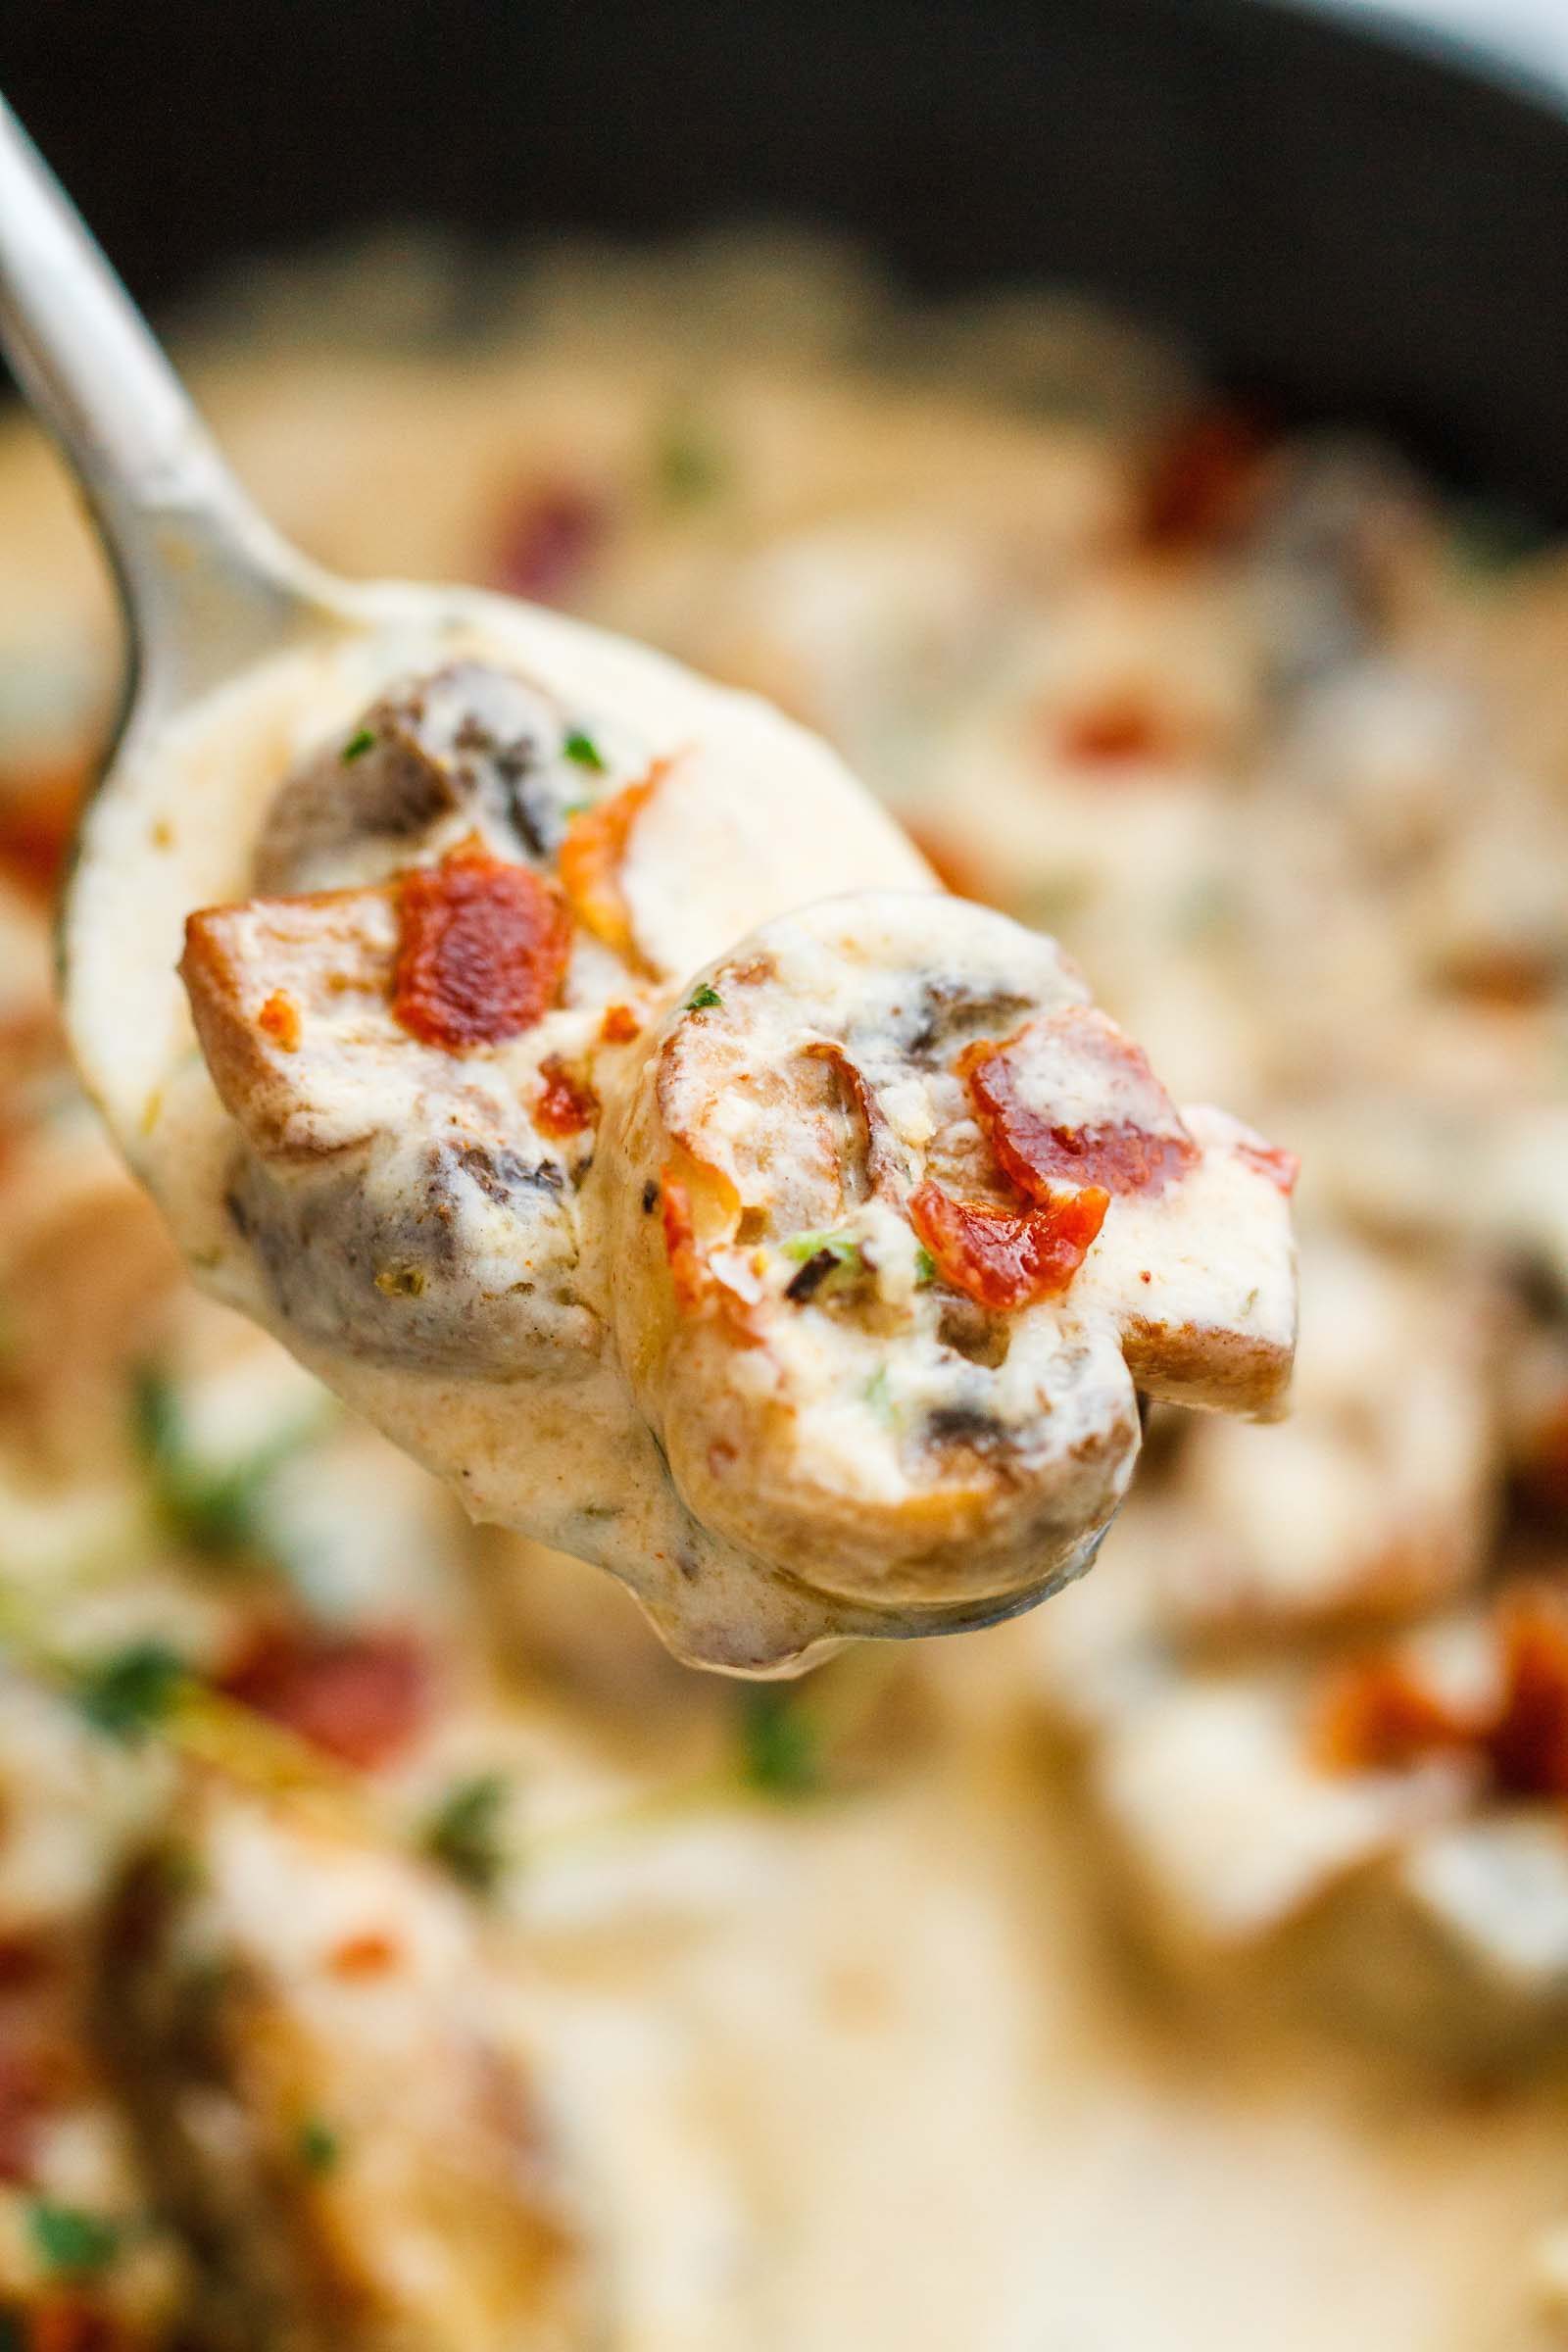 Creamy Garlic Parmesan Mushrooms with Bacon - A decadent garlic parmesan mushroom cream sauce that will have you licking your plate clean!